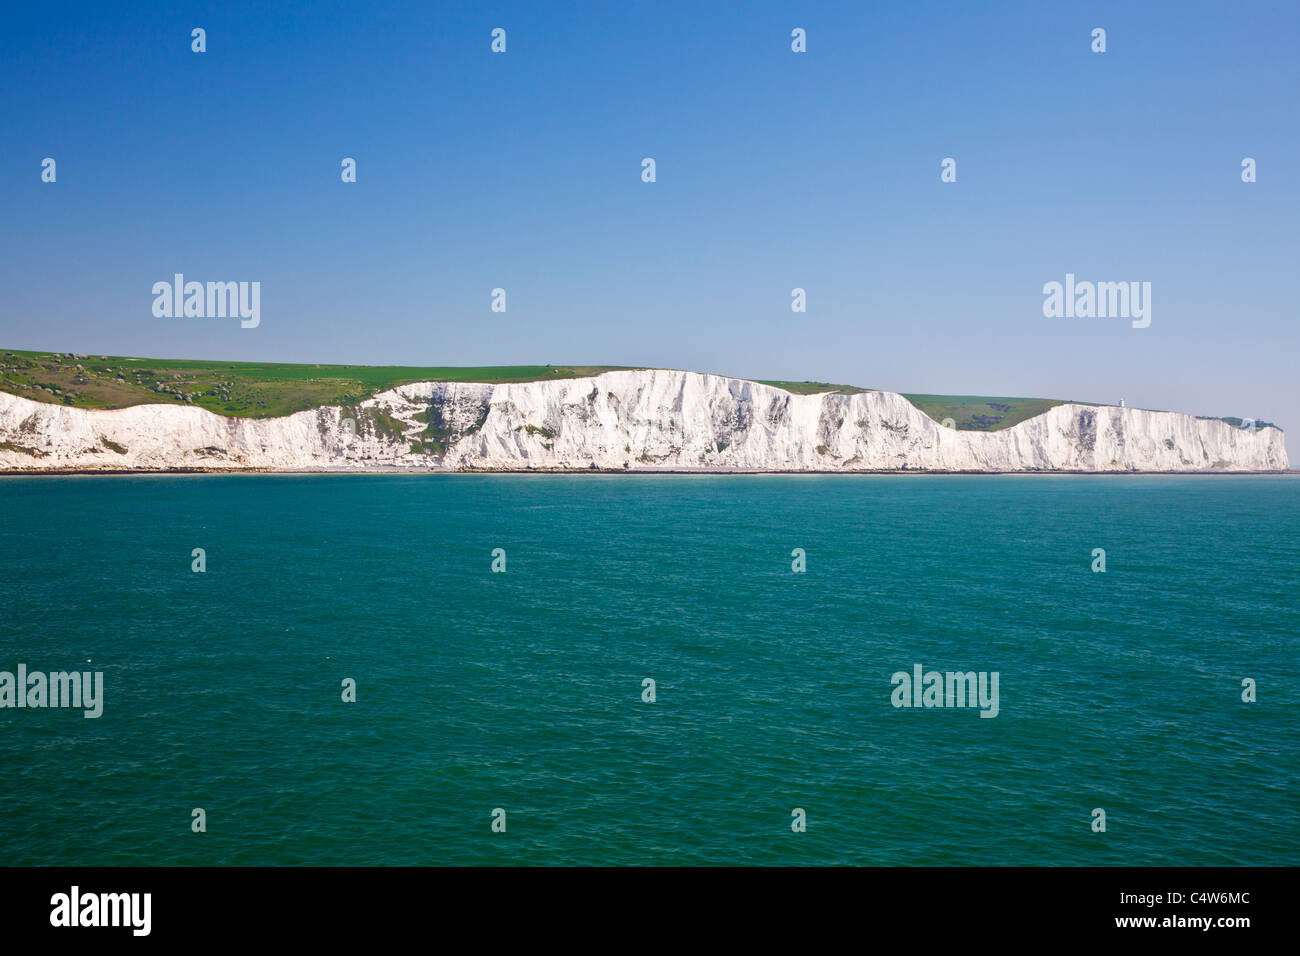 White Cliffs of Dover, an iconic view of England's coastline Stock Photo